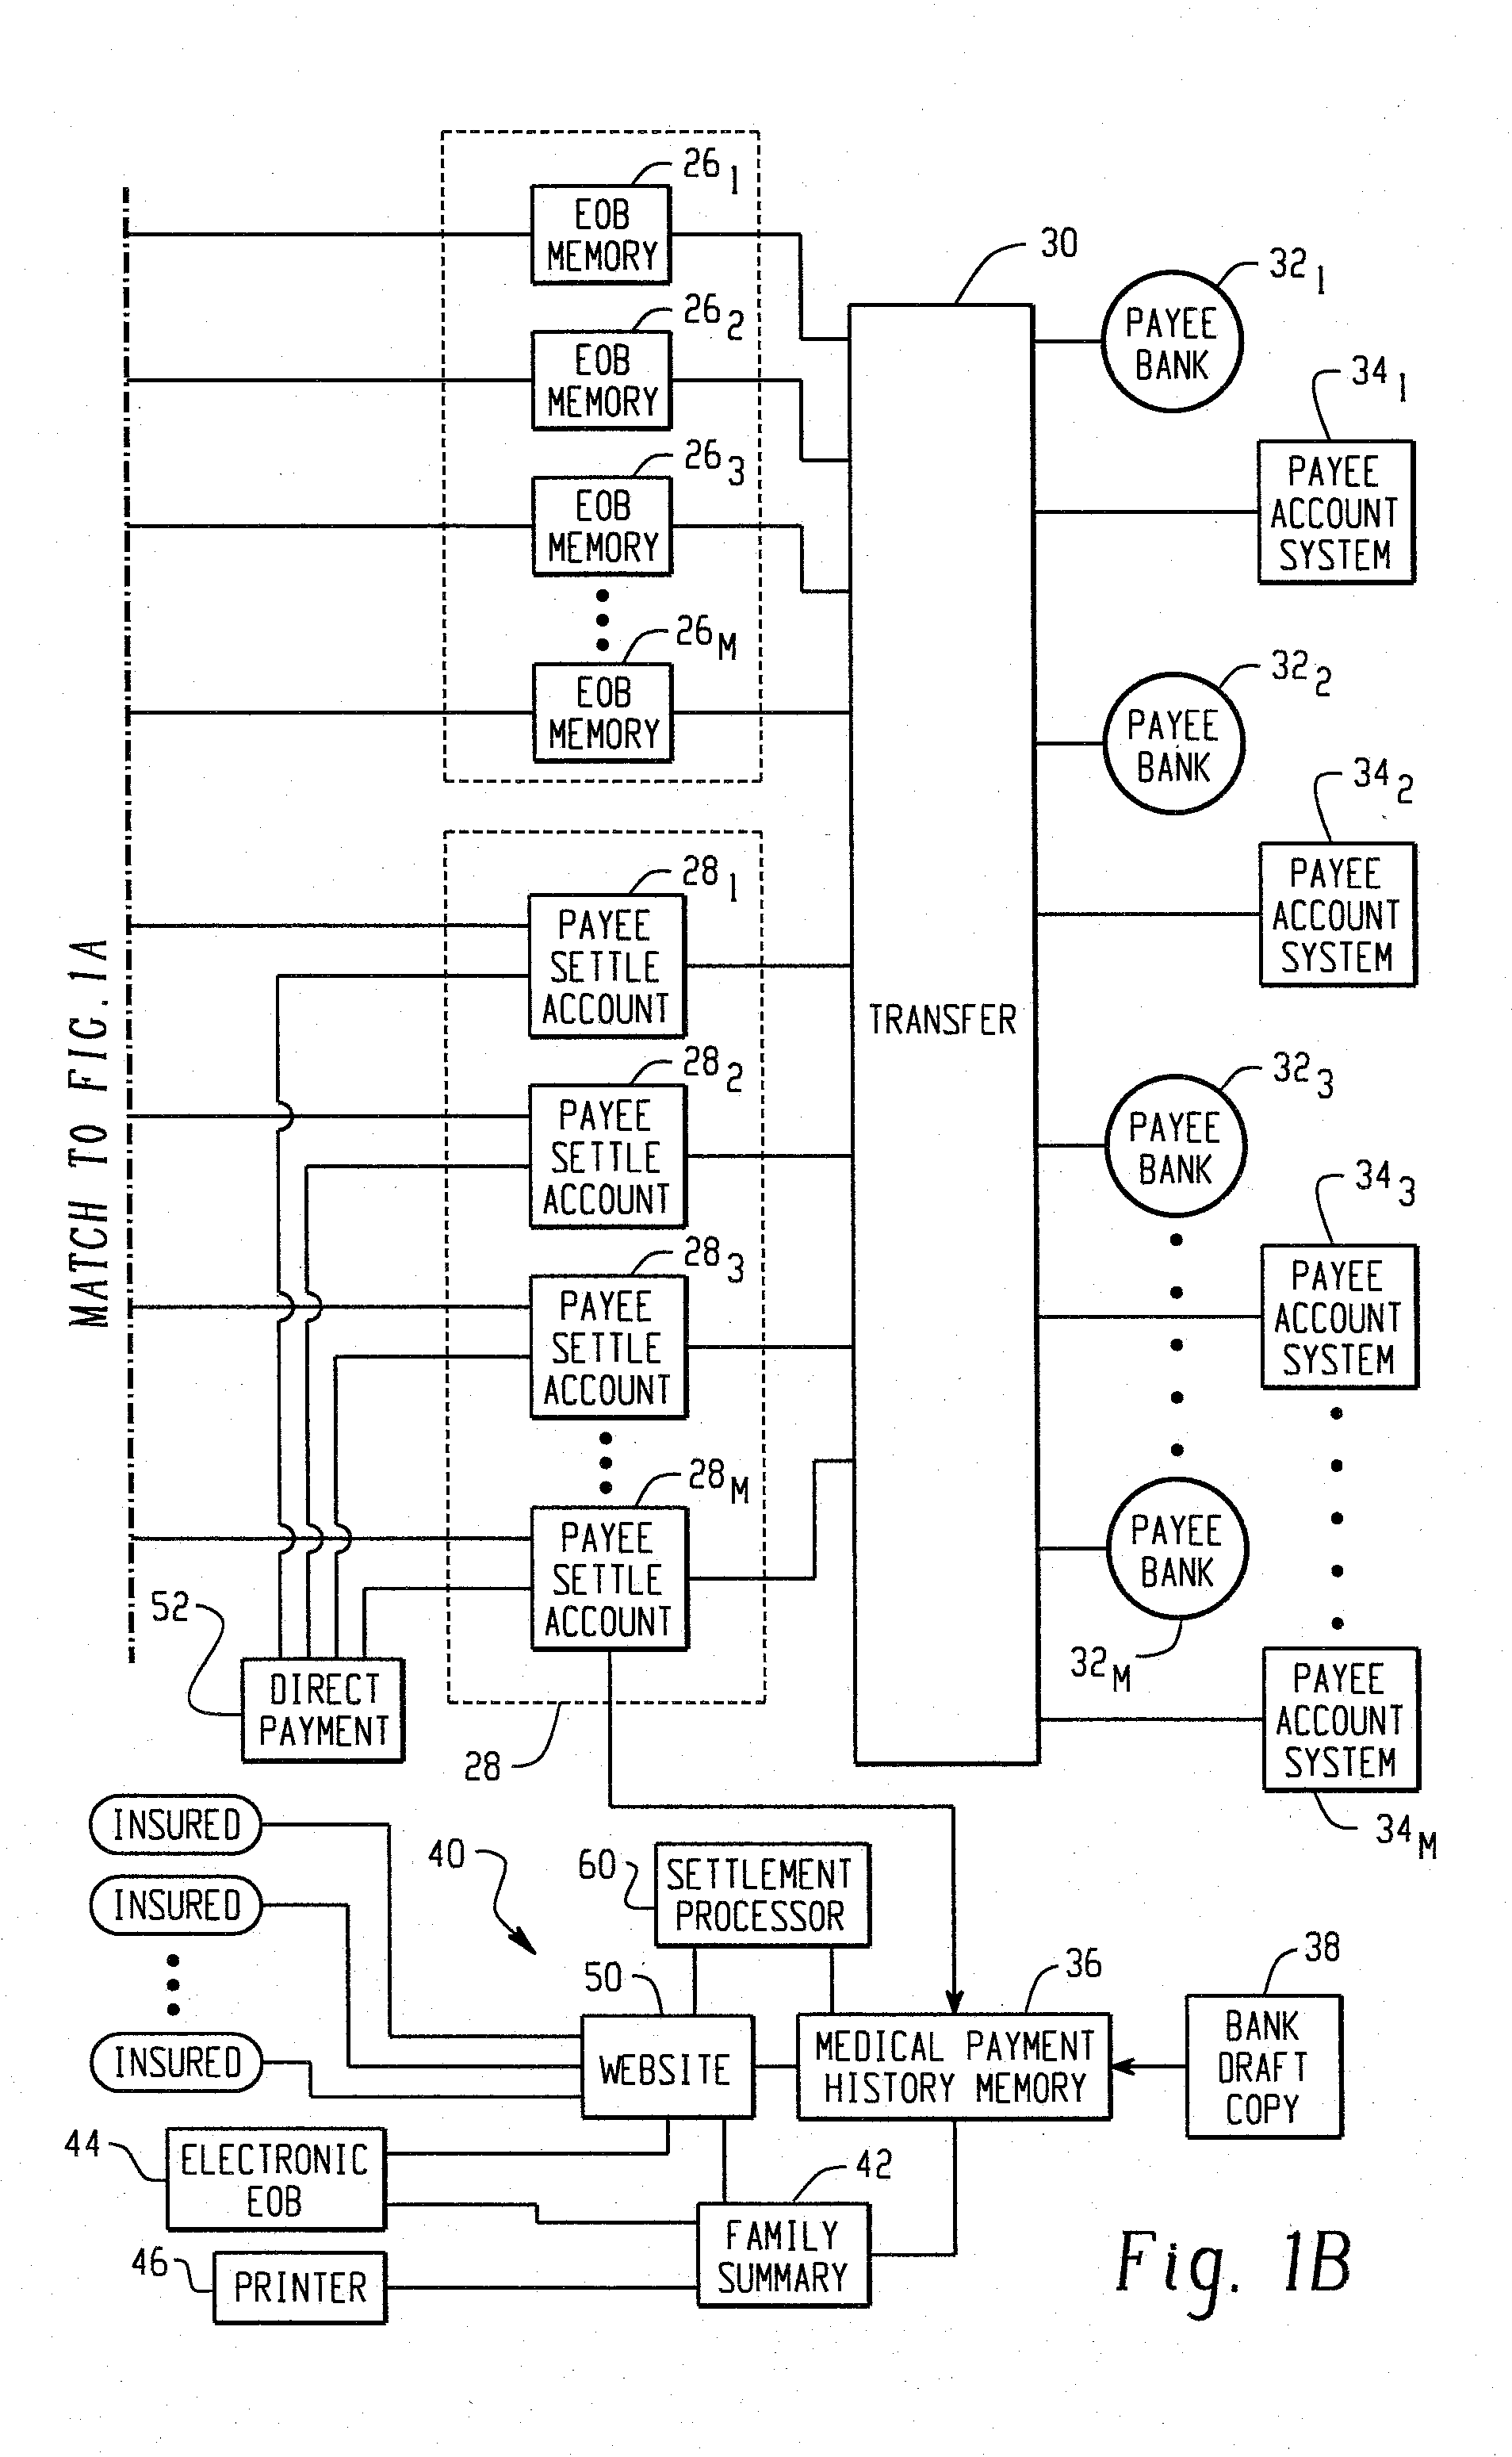 Medical claims payment system with payment consolidation from multiple employer accounts